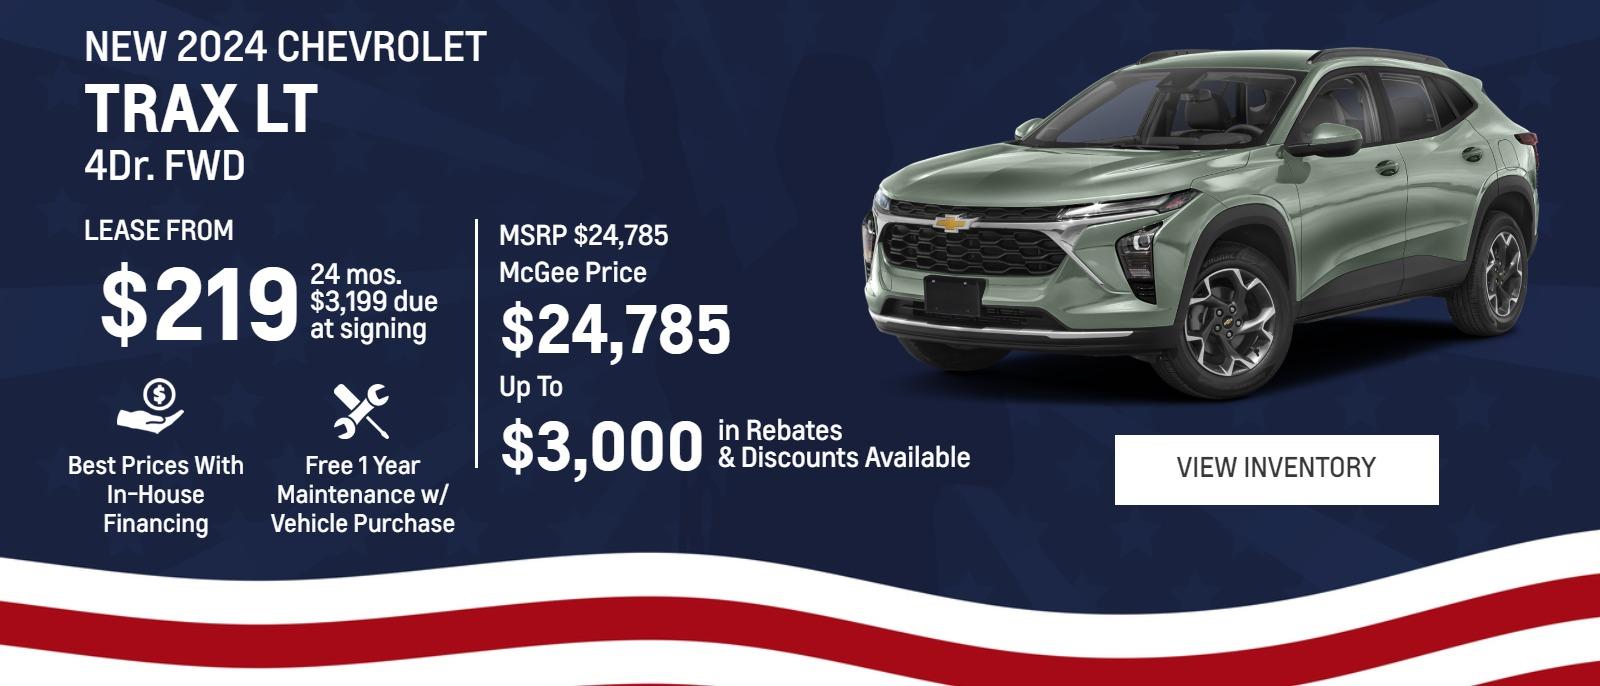 New 2024 Chevrolet
Trax LT 4Dr. FWD 

Lease From
$219
24 mos.
$3,199 due
at signing

MSRP $24,785
McGee Price
$24,785 (bold larger text)

Up To
$3,000 (bold larger text)
in Rebates
&Discounts Available

Best Prices With In-House Financing

Free 1 Year Maintenance
w/ Vehicle Purchase